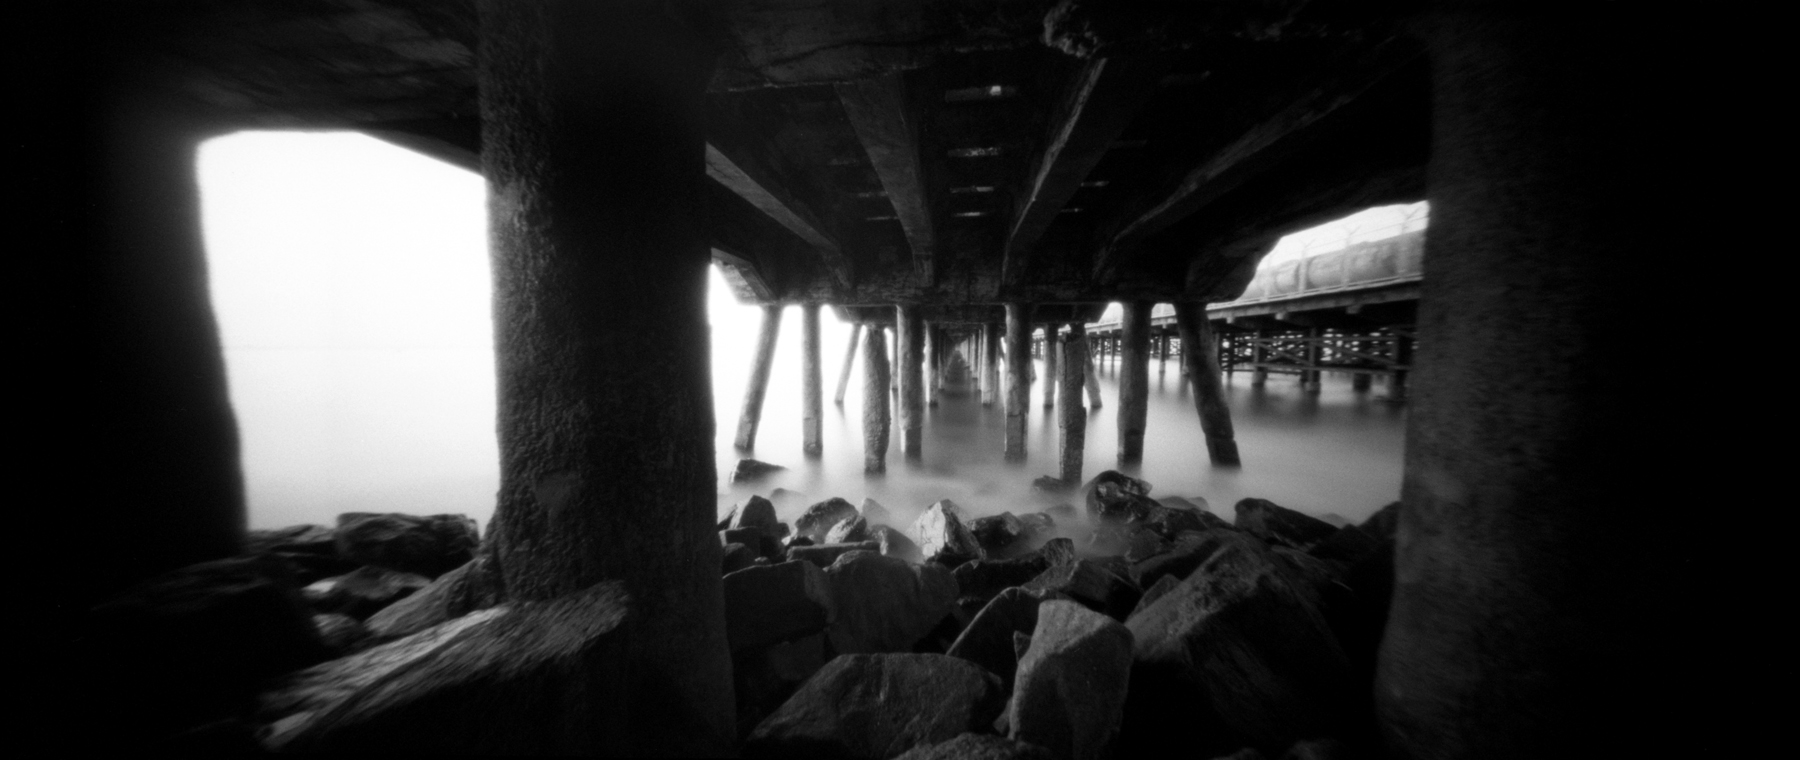 there are other worlds, but they are in this one #3 | 6x12 pinhole camera | Jesús Joglar